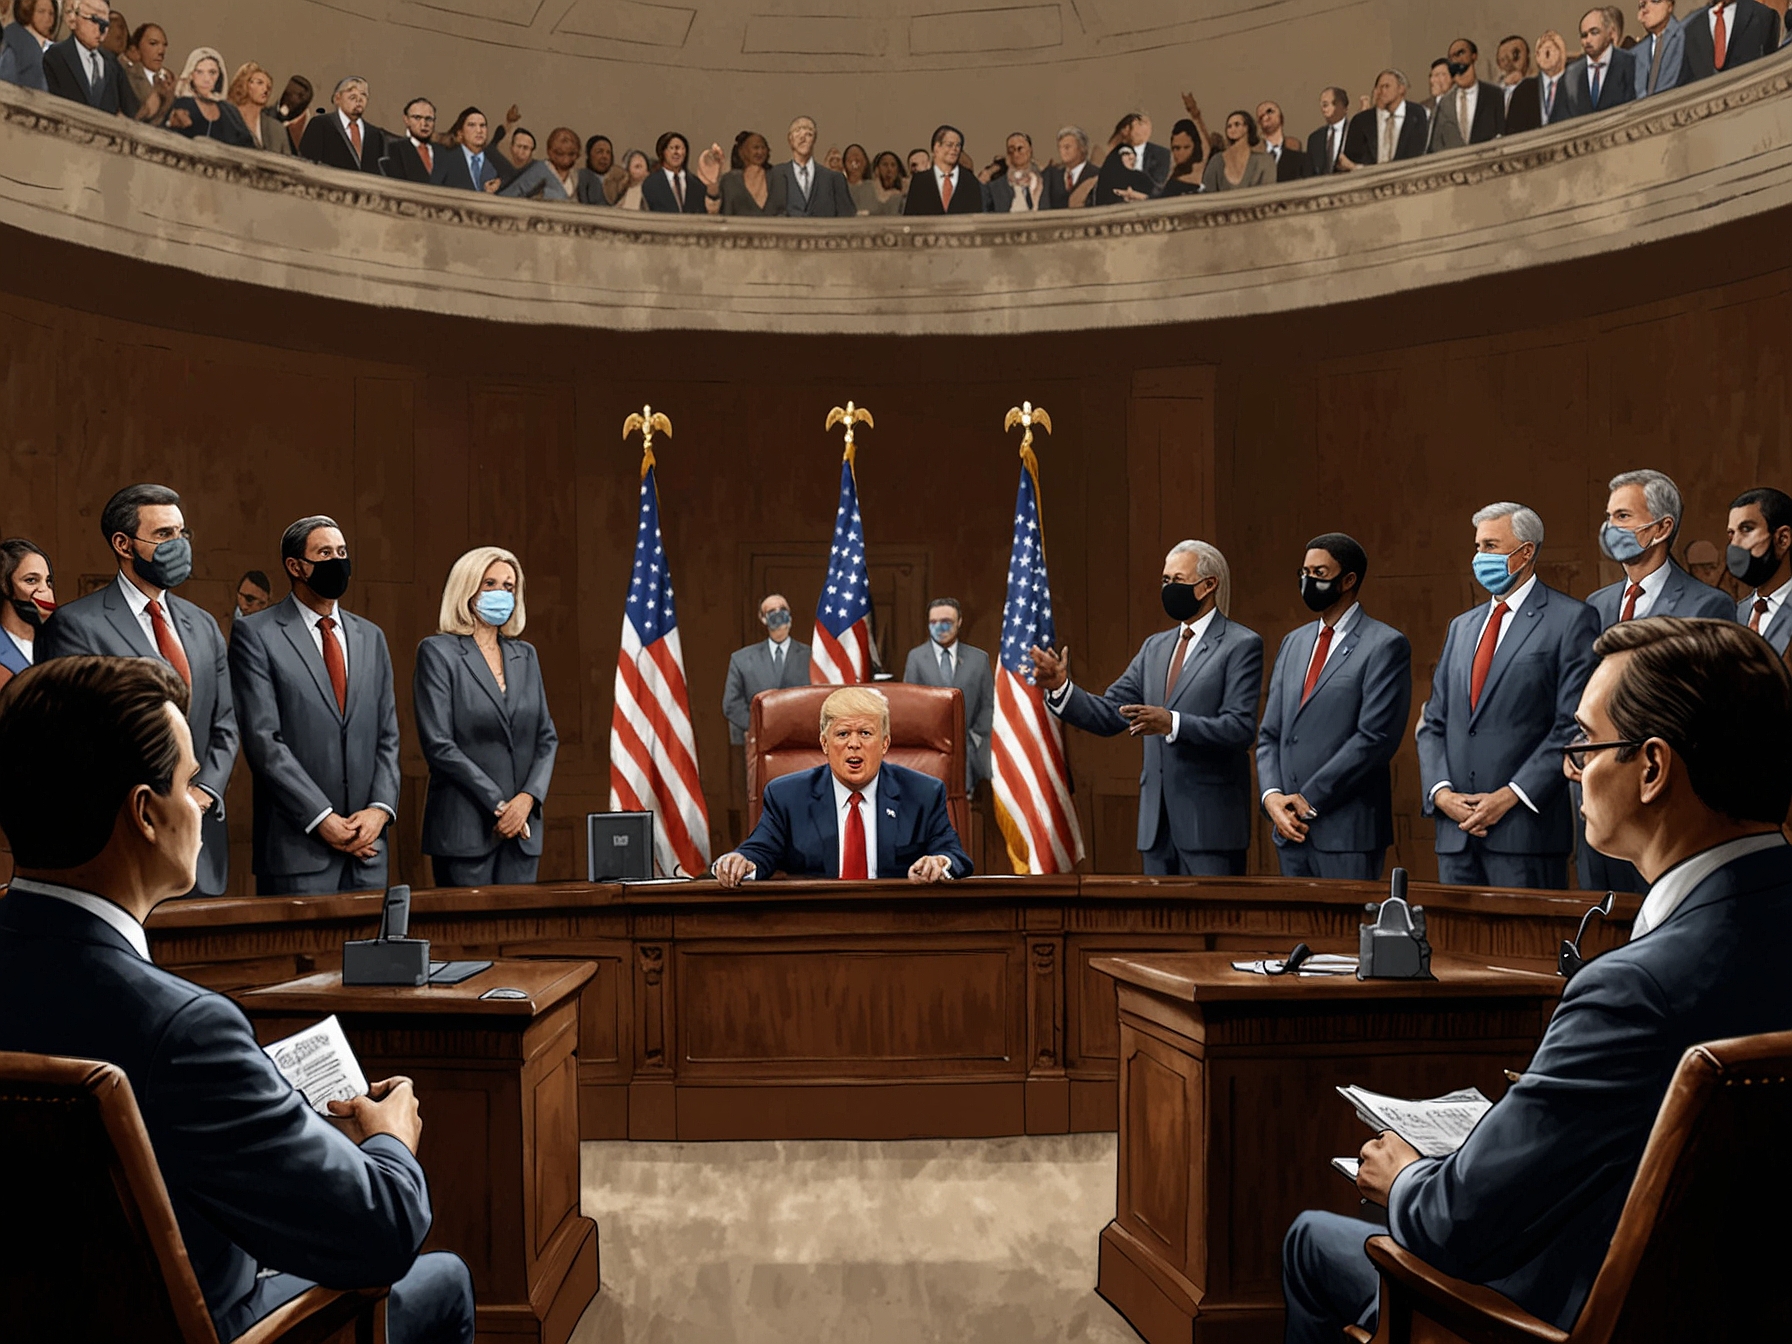 A divided Congress during Kamlager-Dove's speech, with some GOP members supporting Trump and others distancing themselves, illustrating the ongoing debate within the Republican Party.